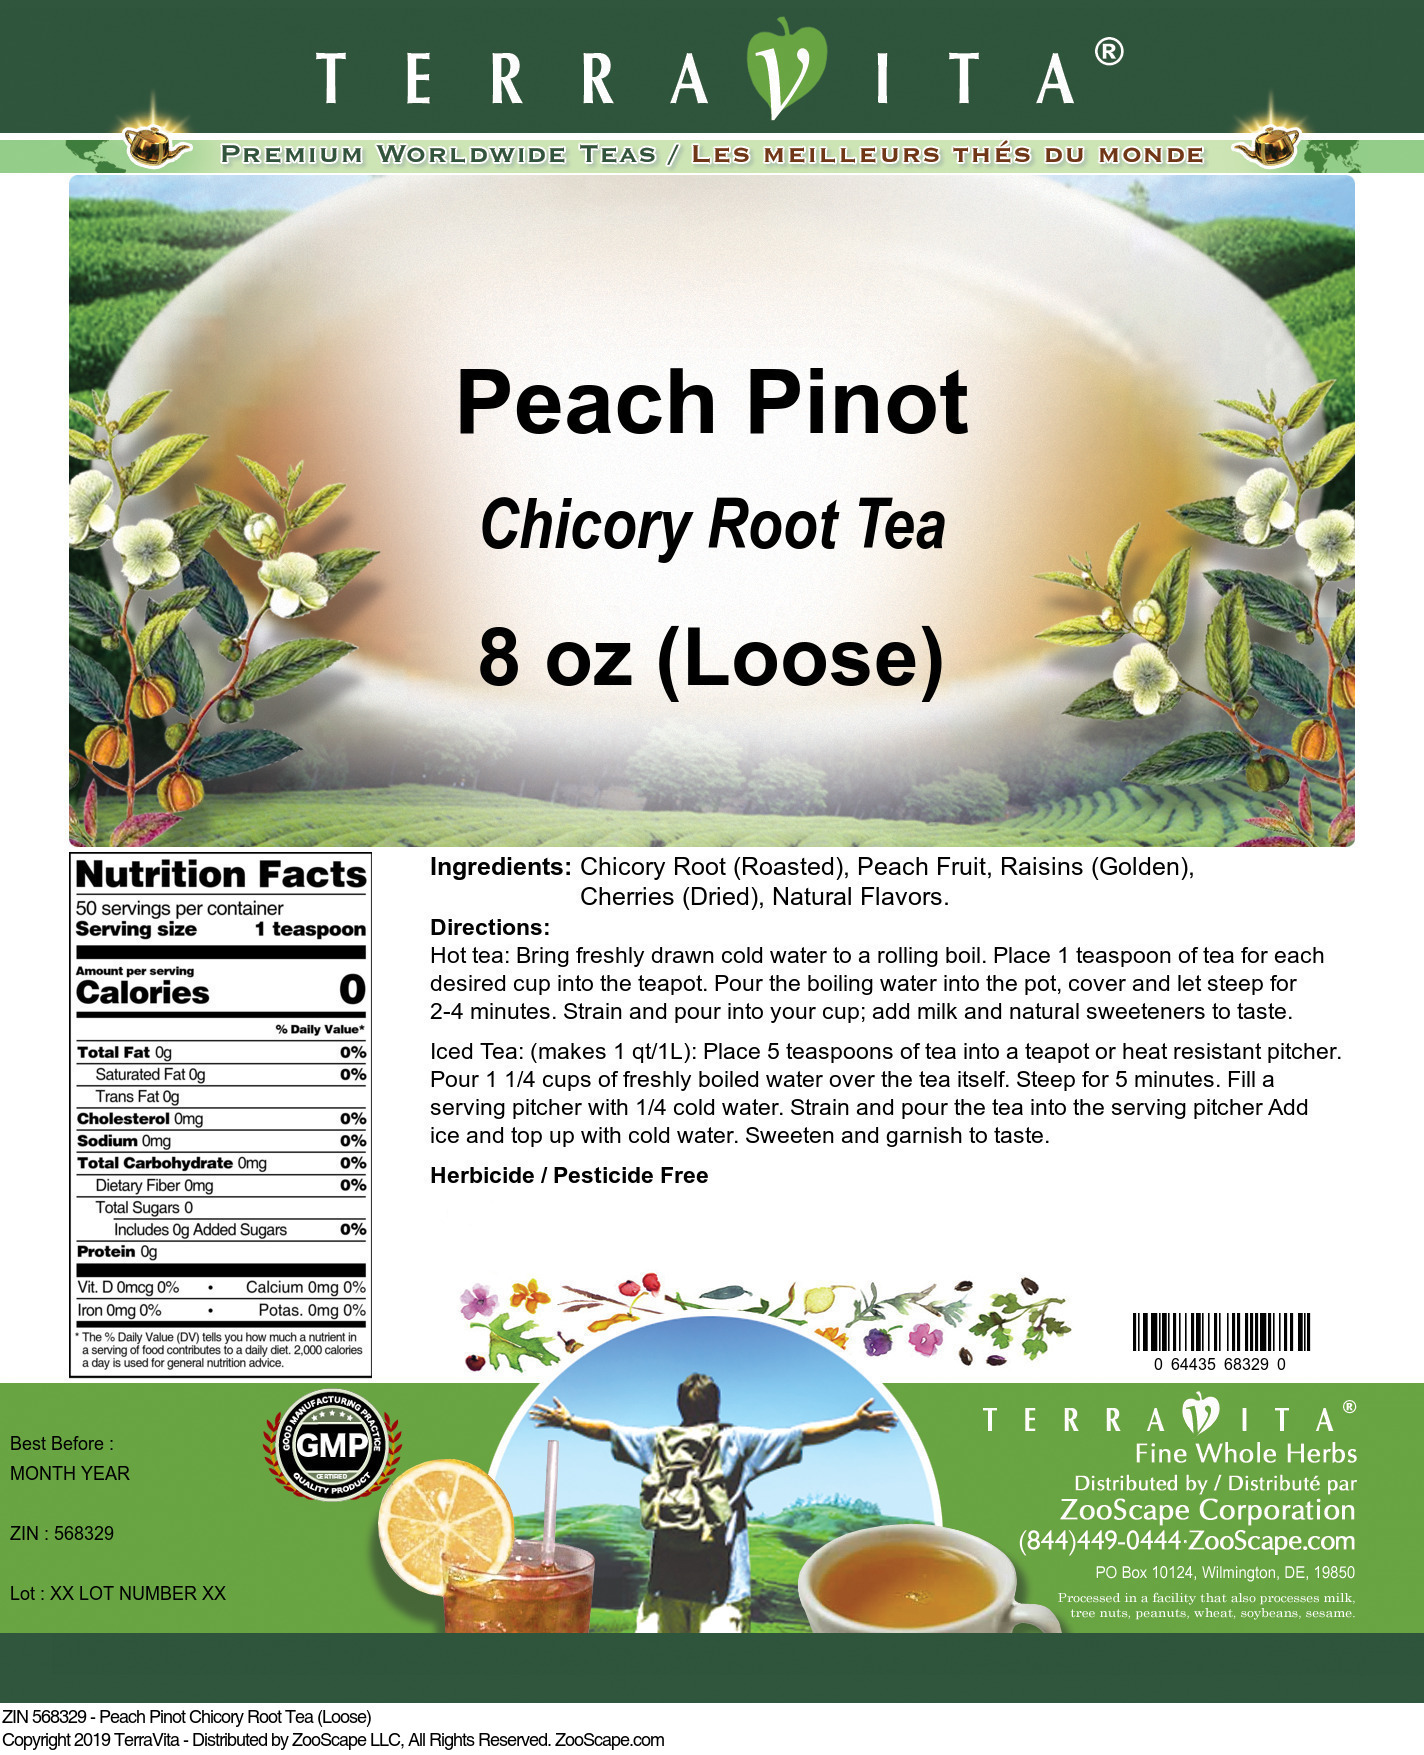 Peach Pinot Chicory Root Tea (Loose) - Label